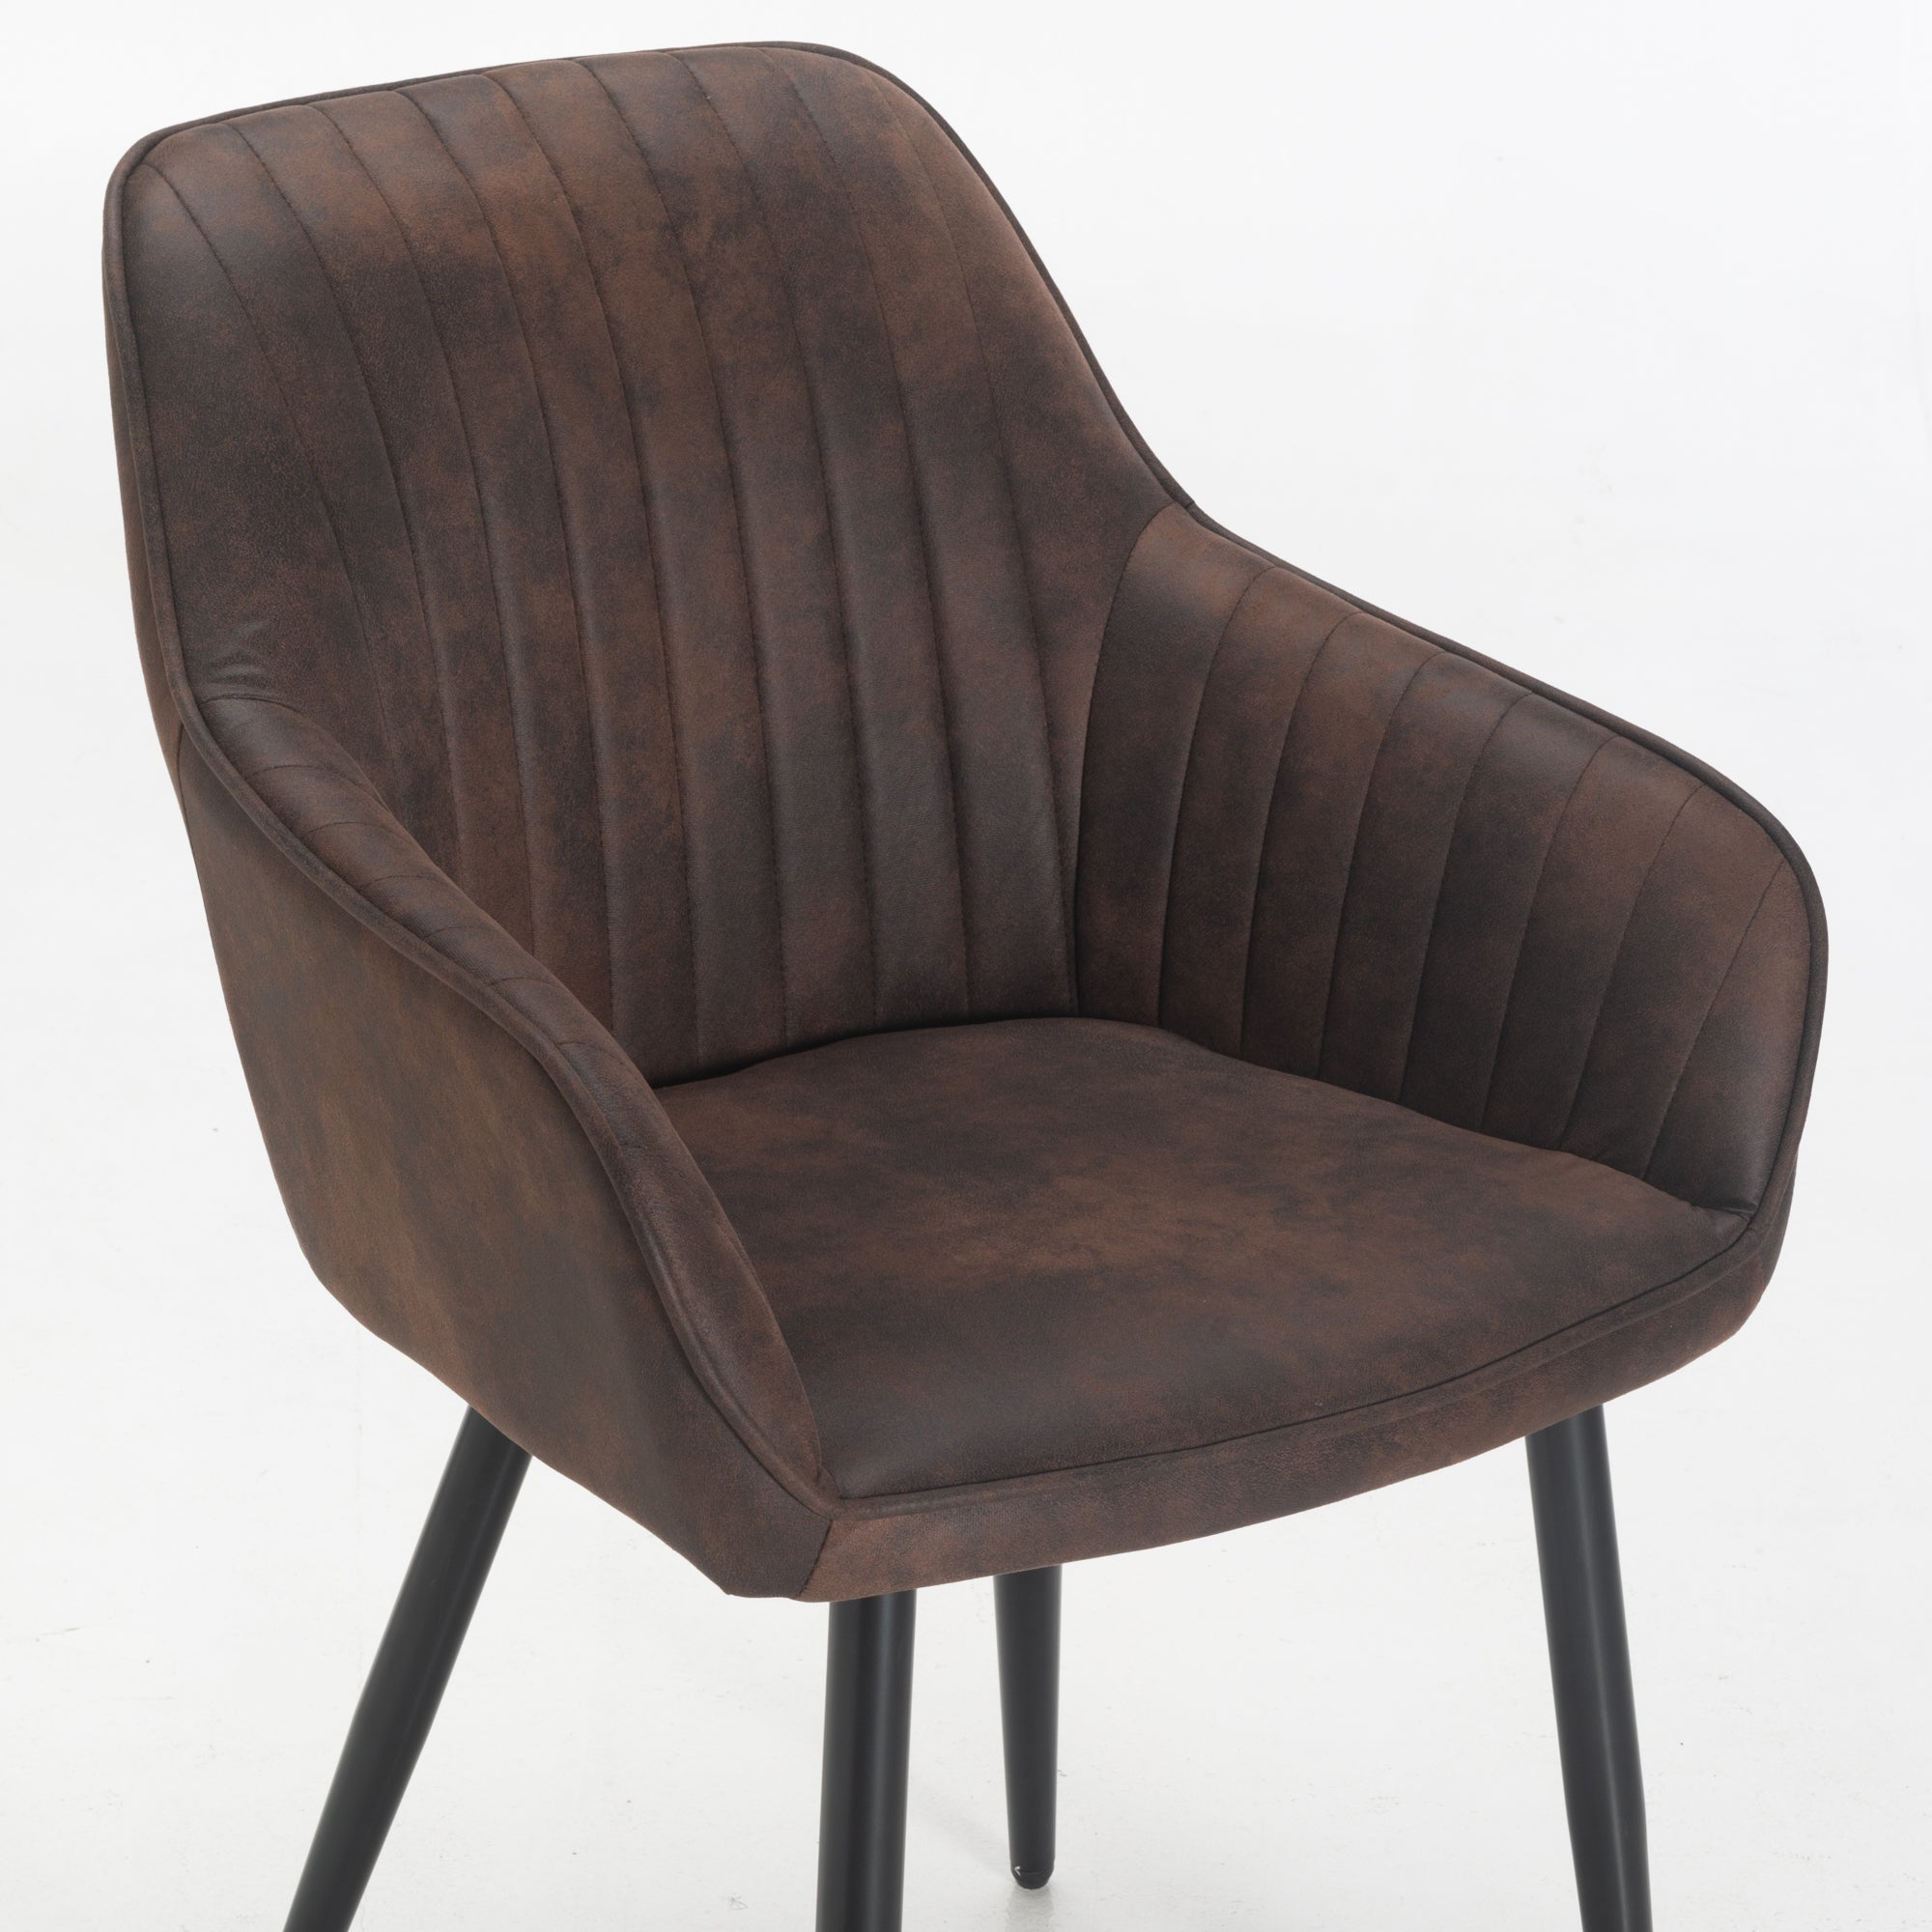 ROCCO FABRIC DINING CHAIR - BROWN